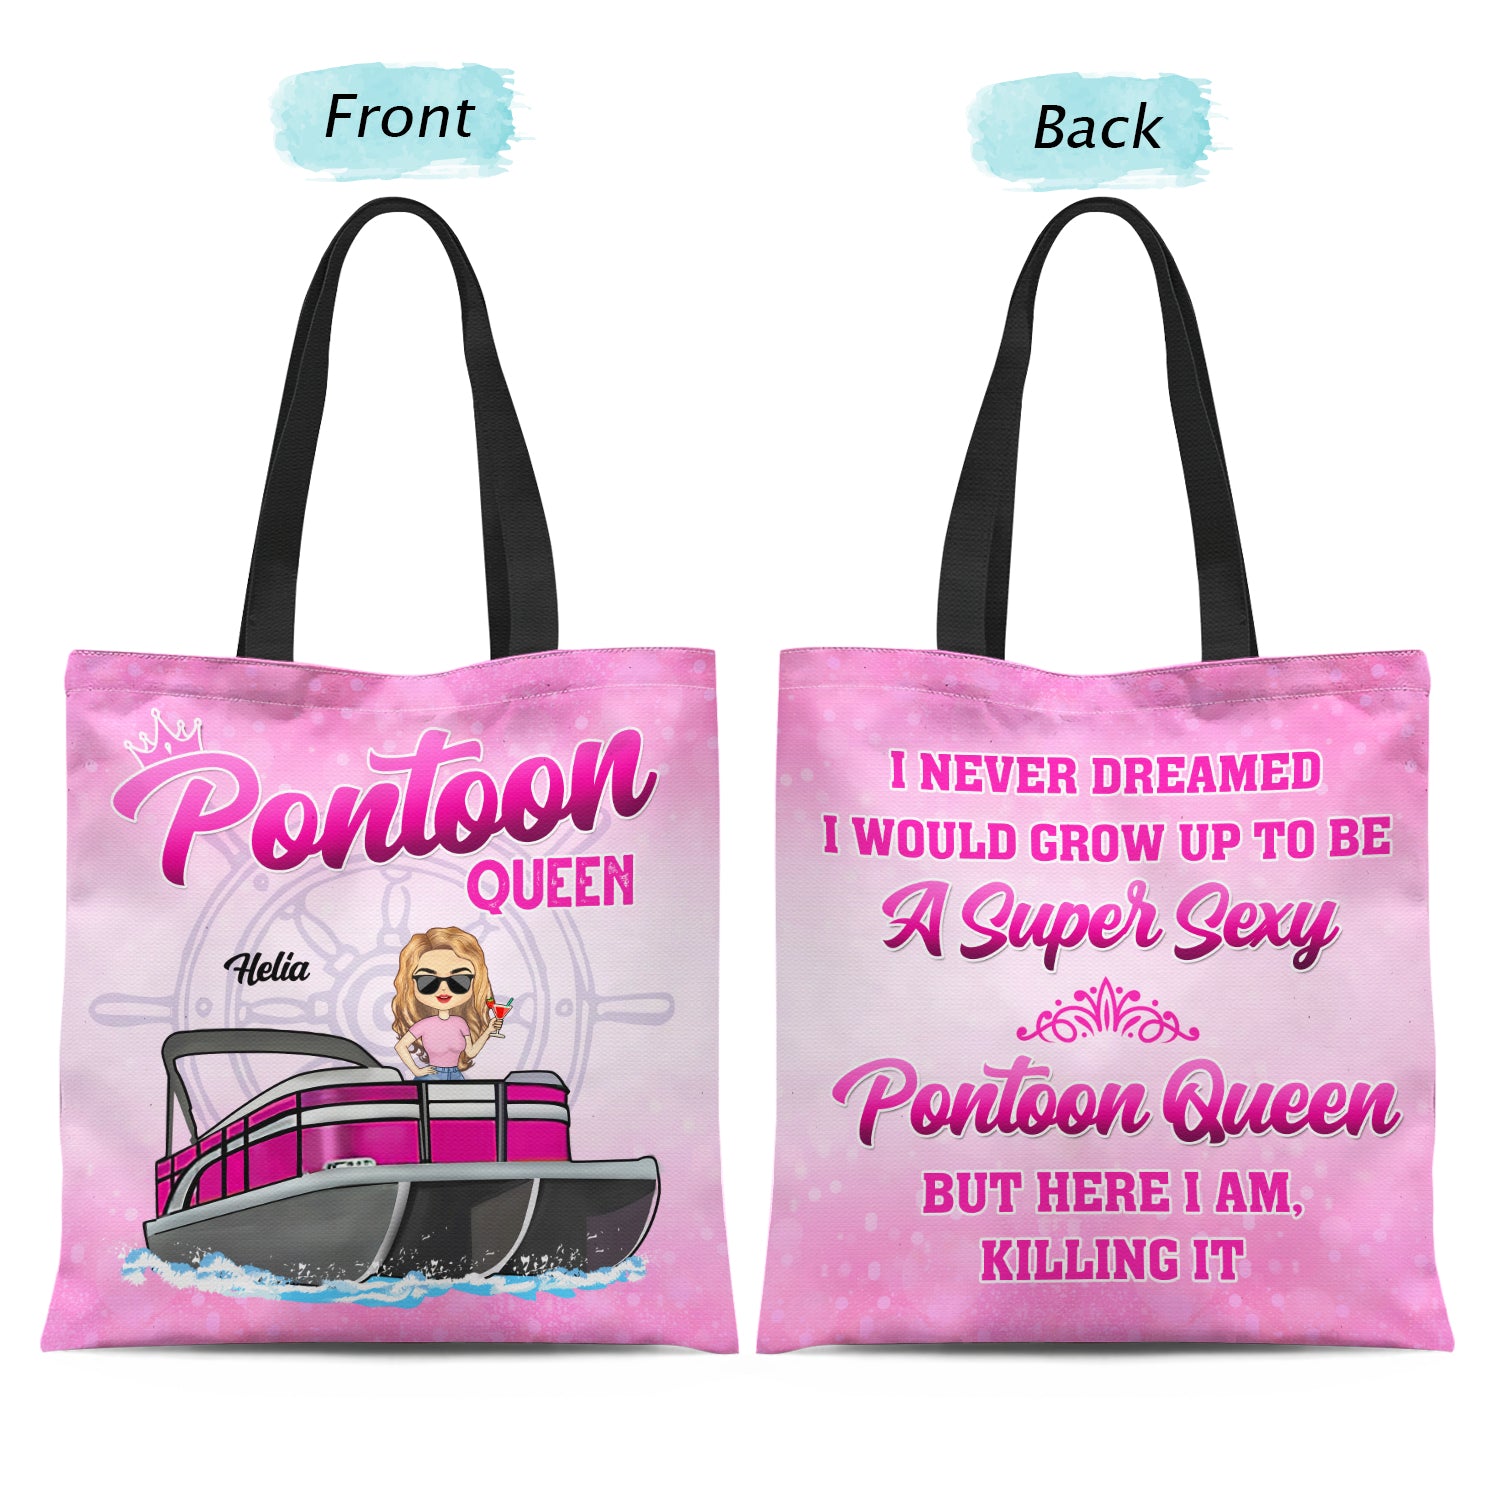 Never Dreamed I'd Grow Up To Be A Super Sexy Pontoon Queen - Traveling, Cruising Gift For Pontooning Lovers, Lake Lovers, Travelers, Women - Personalized Custom Zippered Canvas Bag